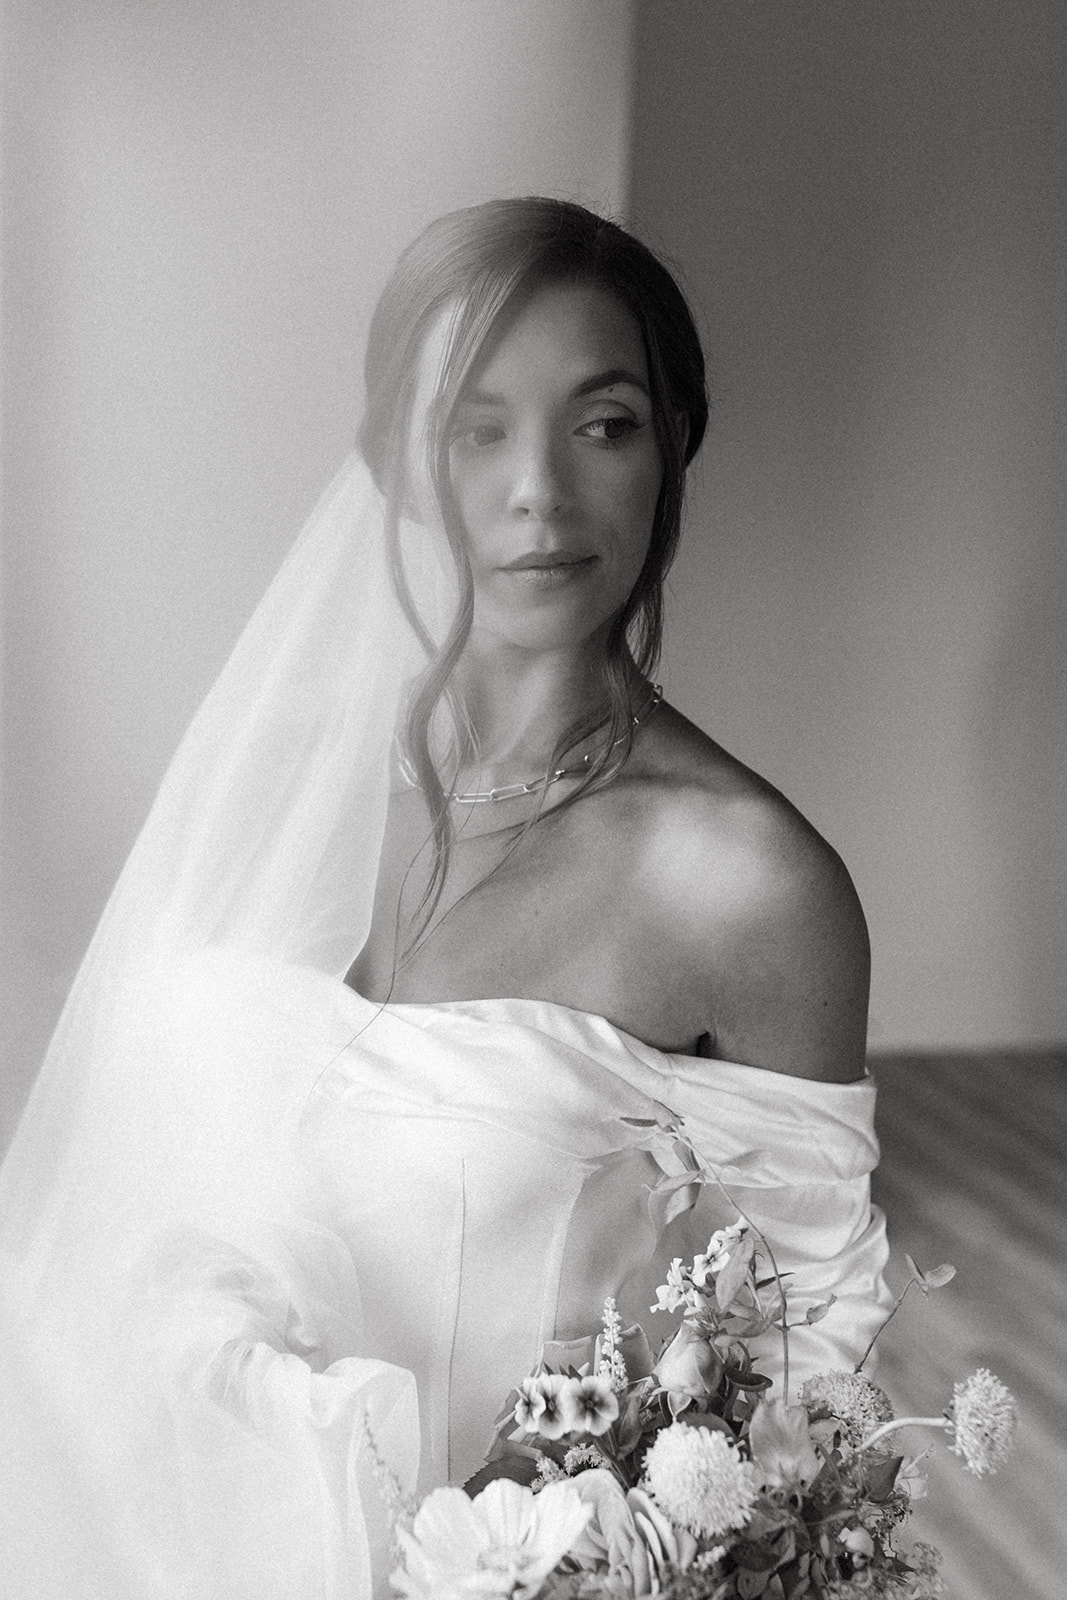 A bride wearing an elegant updo wedding hairstyle and long tulle bridal veil looks into the distance, holding a bouquet.